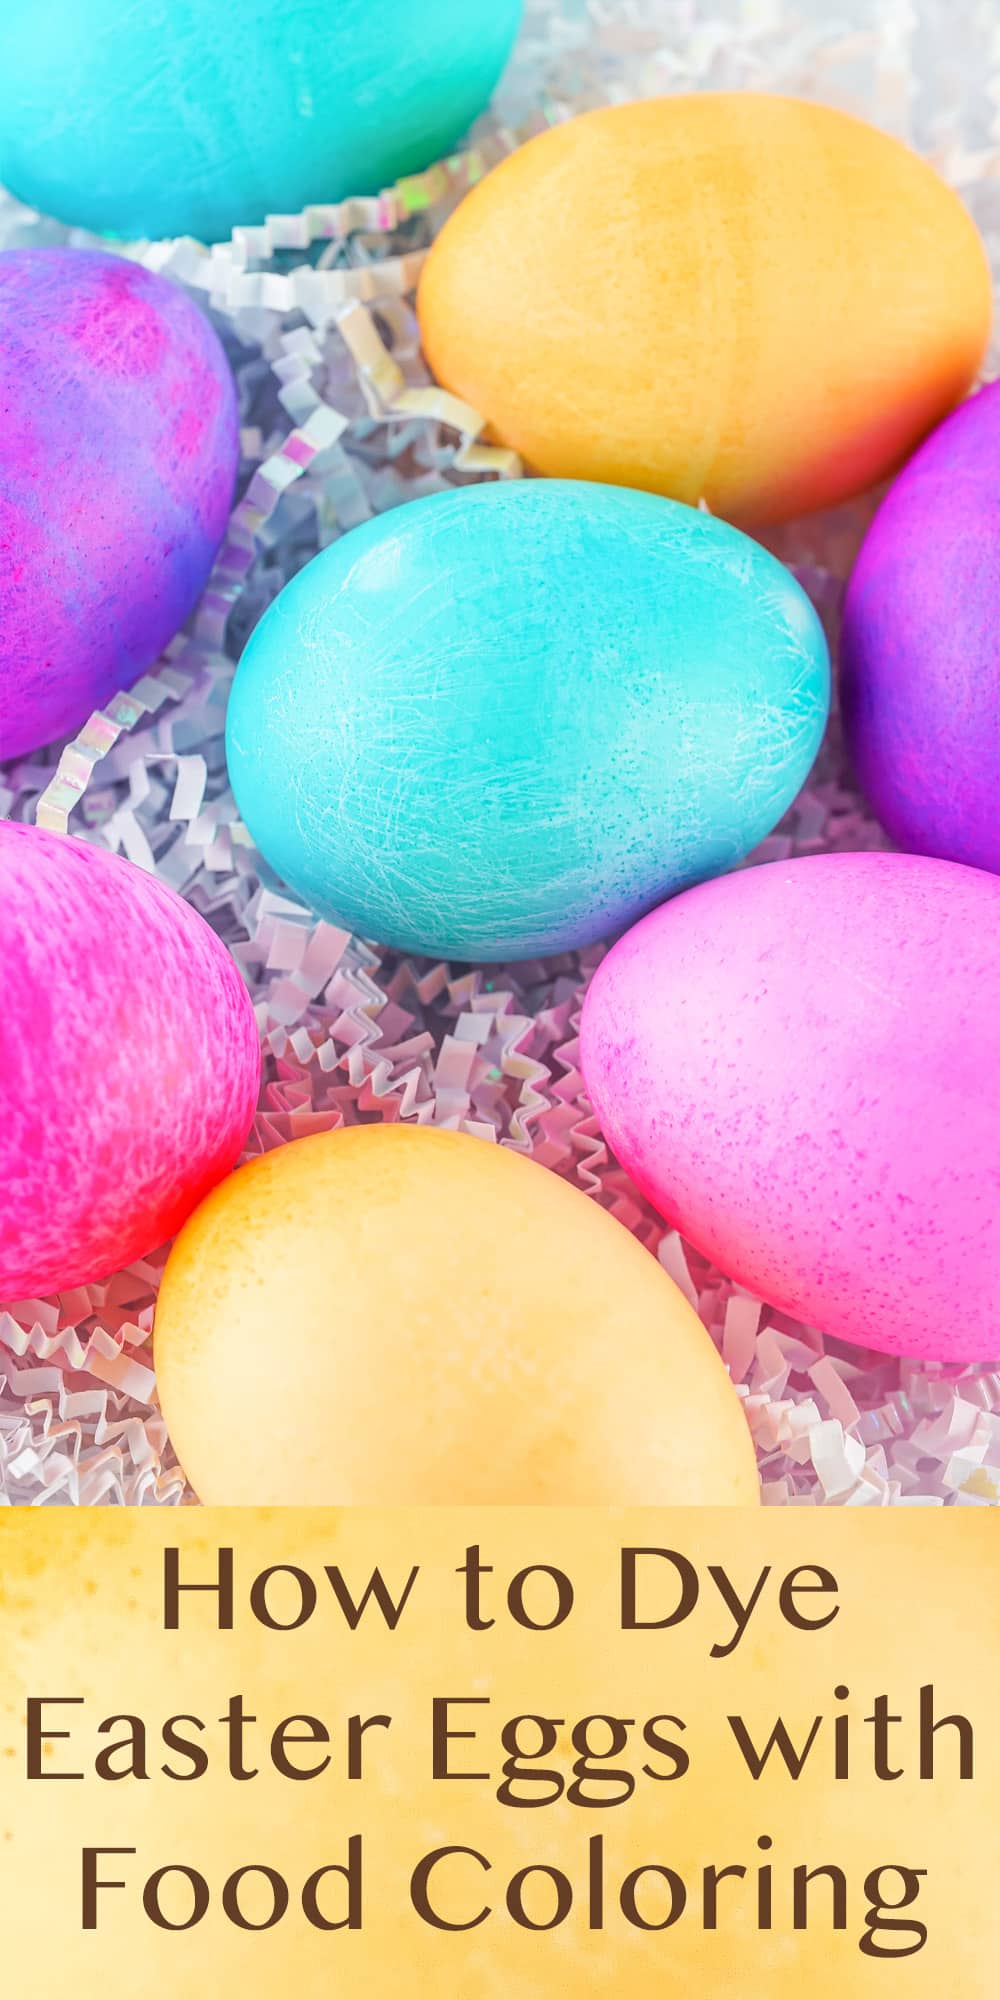 Easter eggs on white Easter grass, title How to Dye Easter Eggs with Food Coloring underneath.